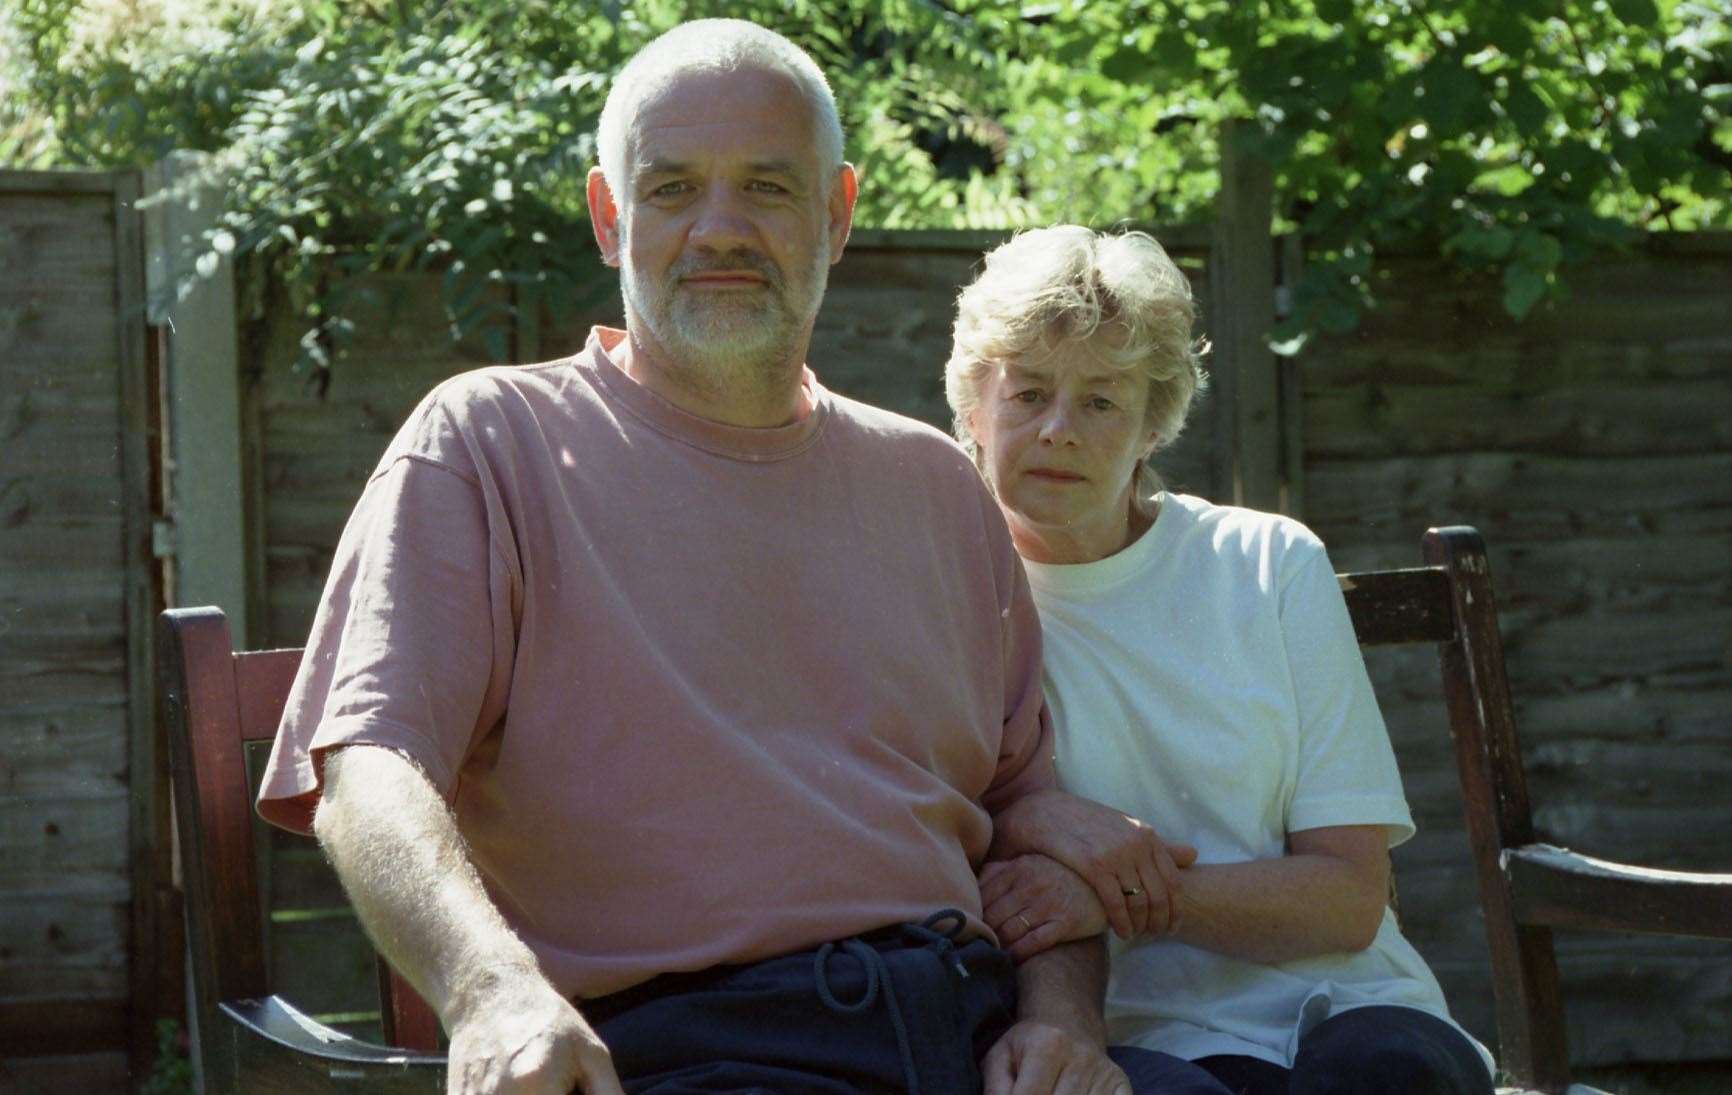 Claire Streader's parents, Peter and Ann. Both have since passed.